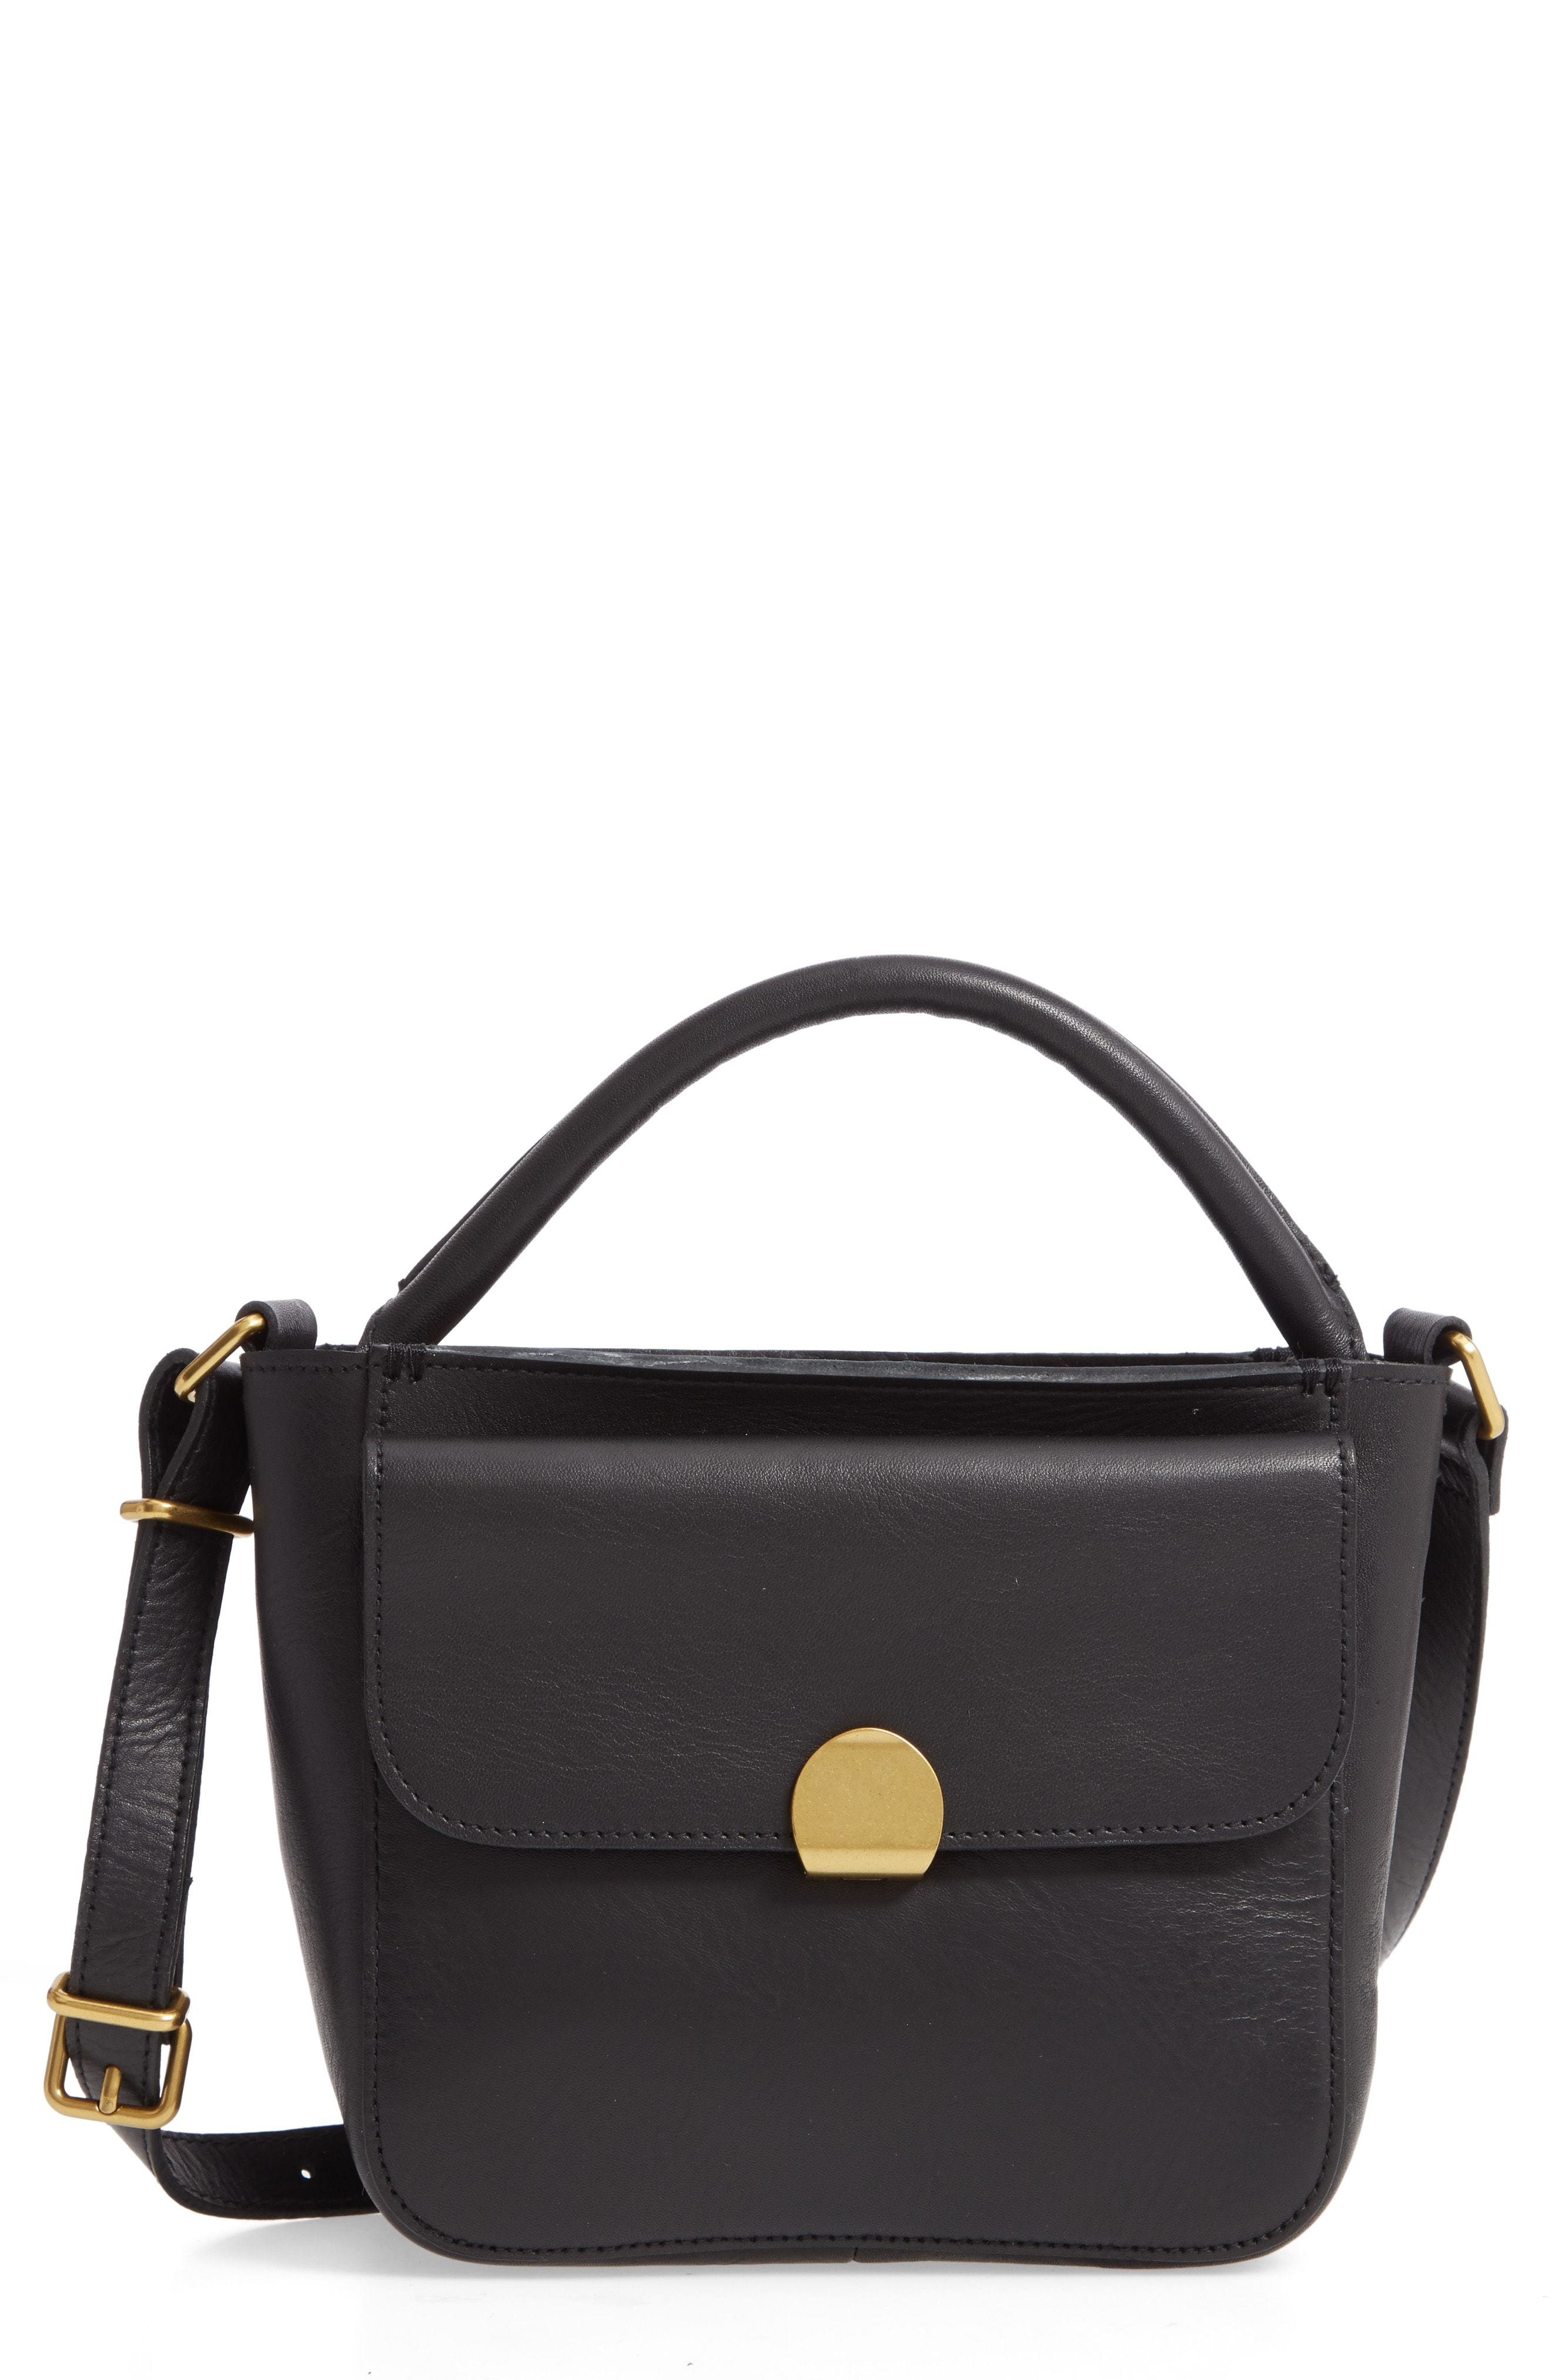 Madewell The Mini Abroad Leather Crossbody Bag, $148 | Nordstrom ...